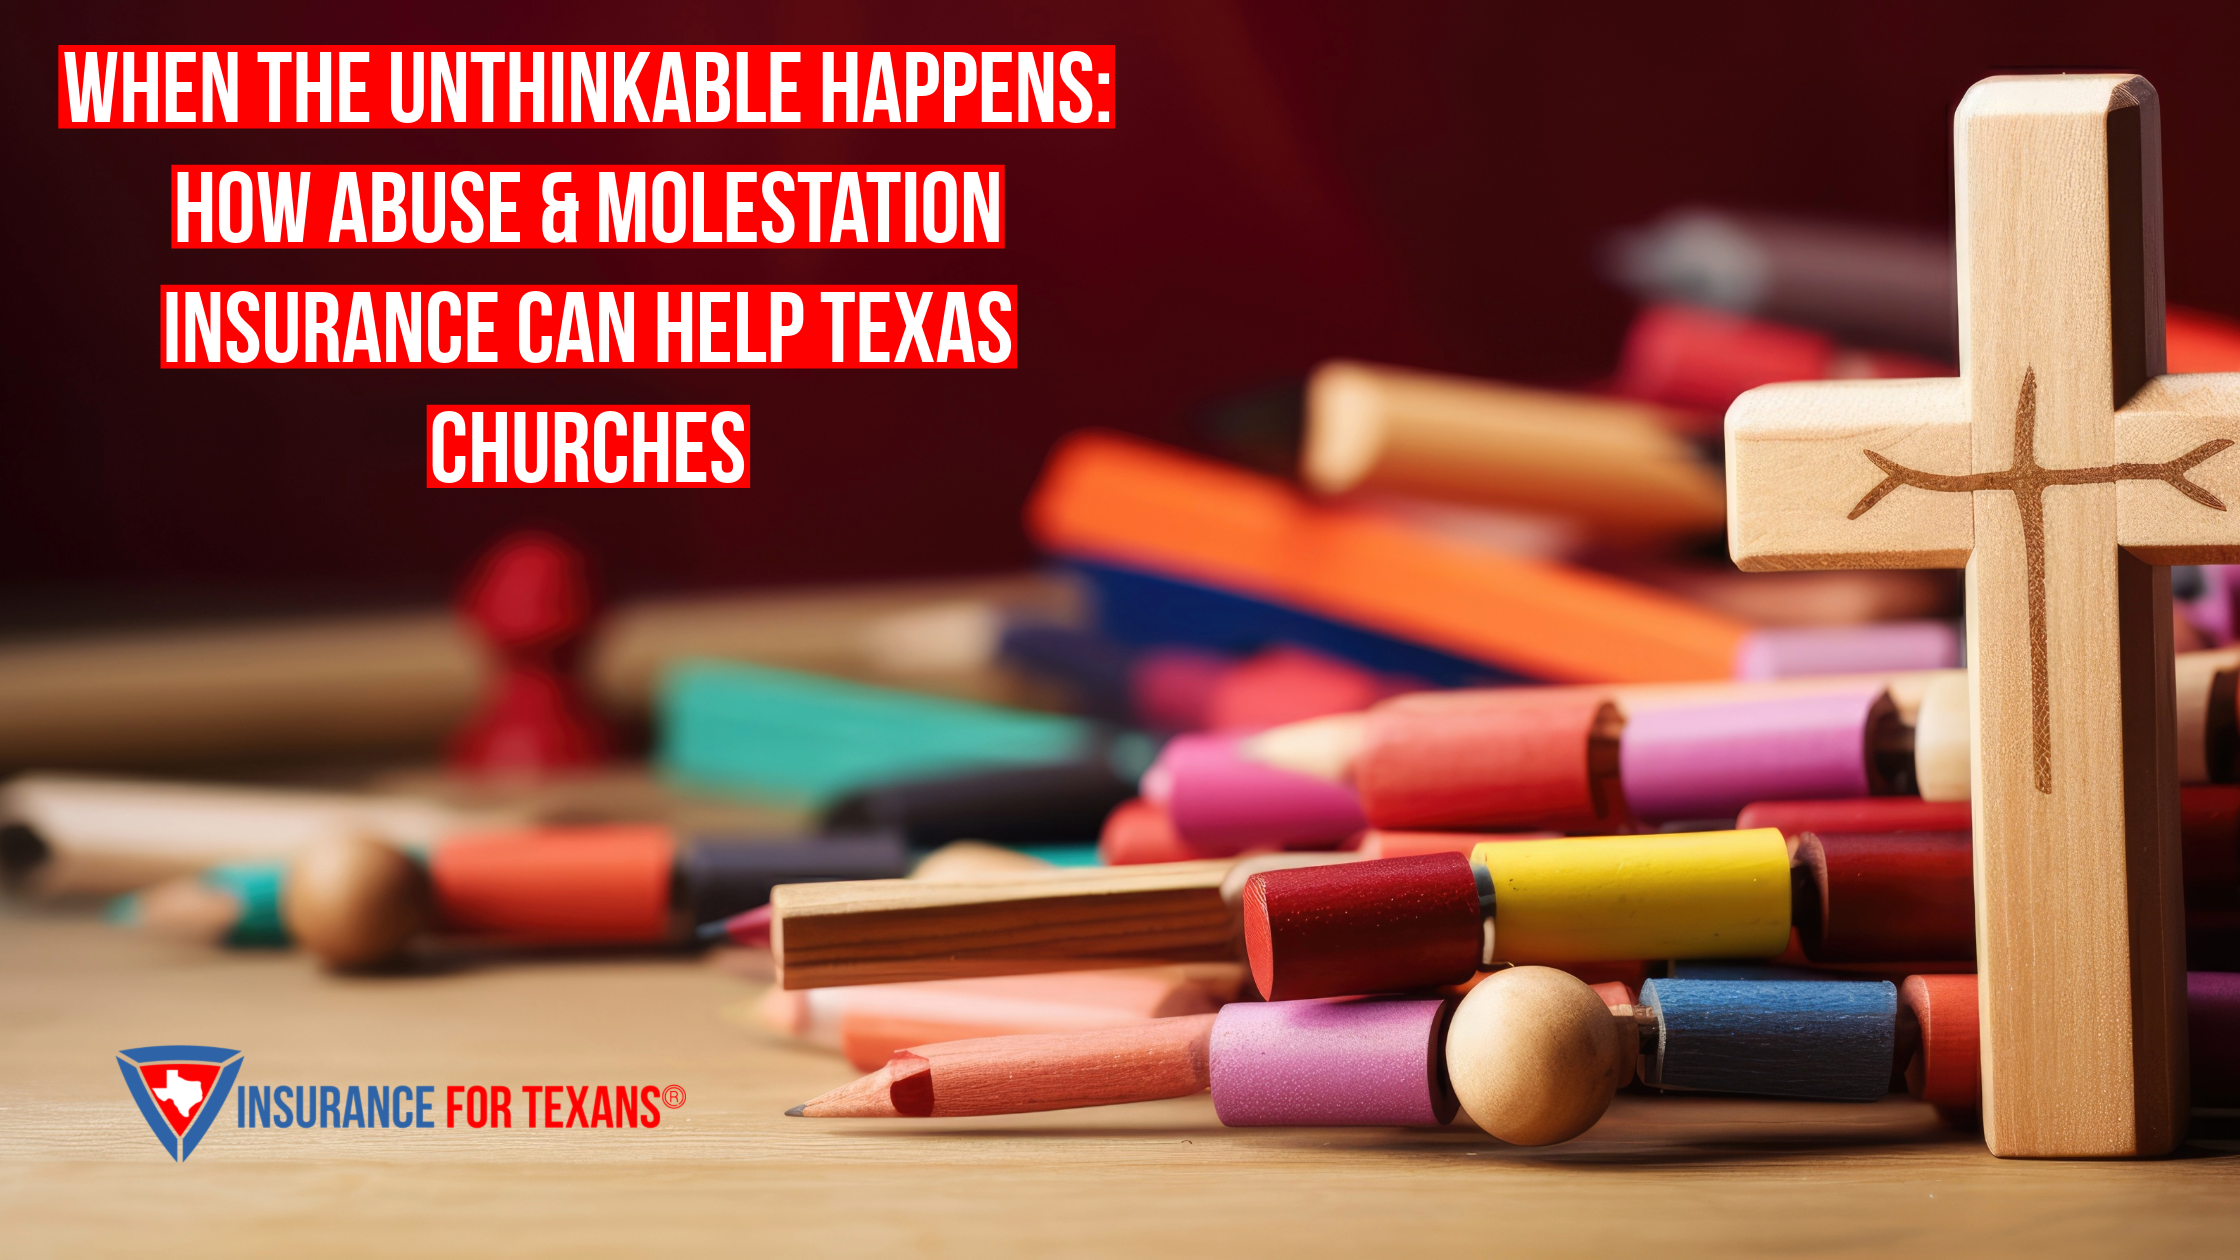 When the Unthinkable Happens: How Abuse & Molestation Insurance Can Help Texas Churches